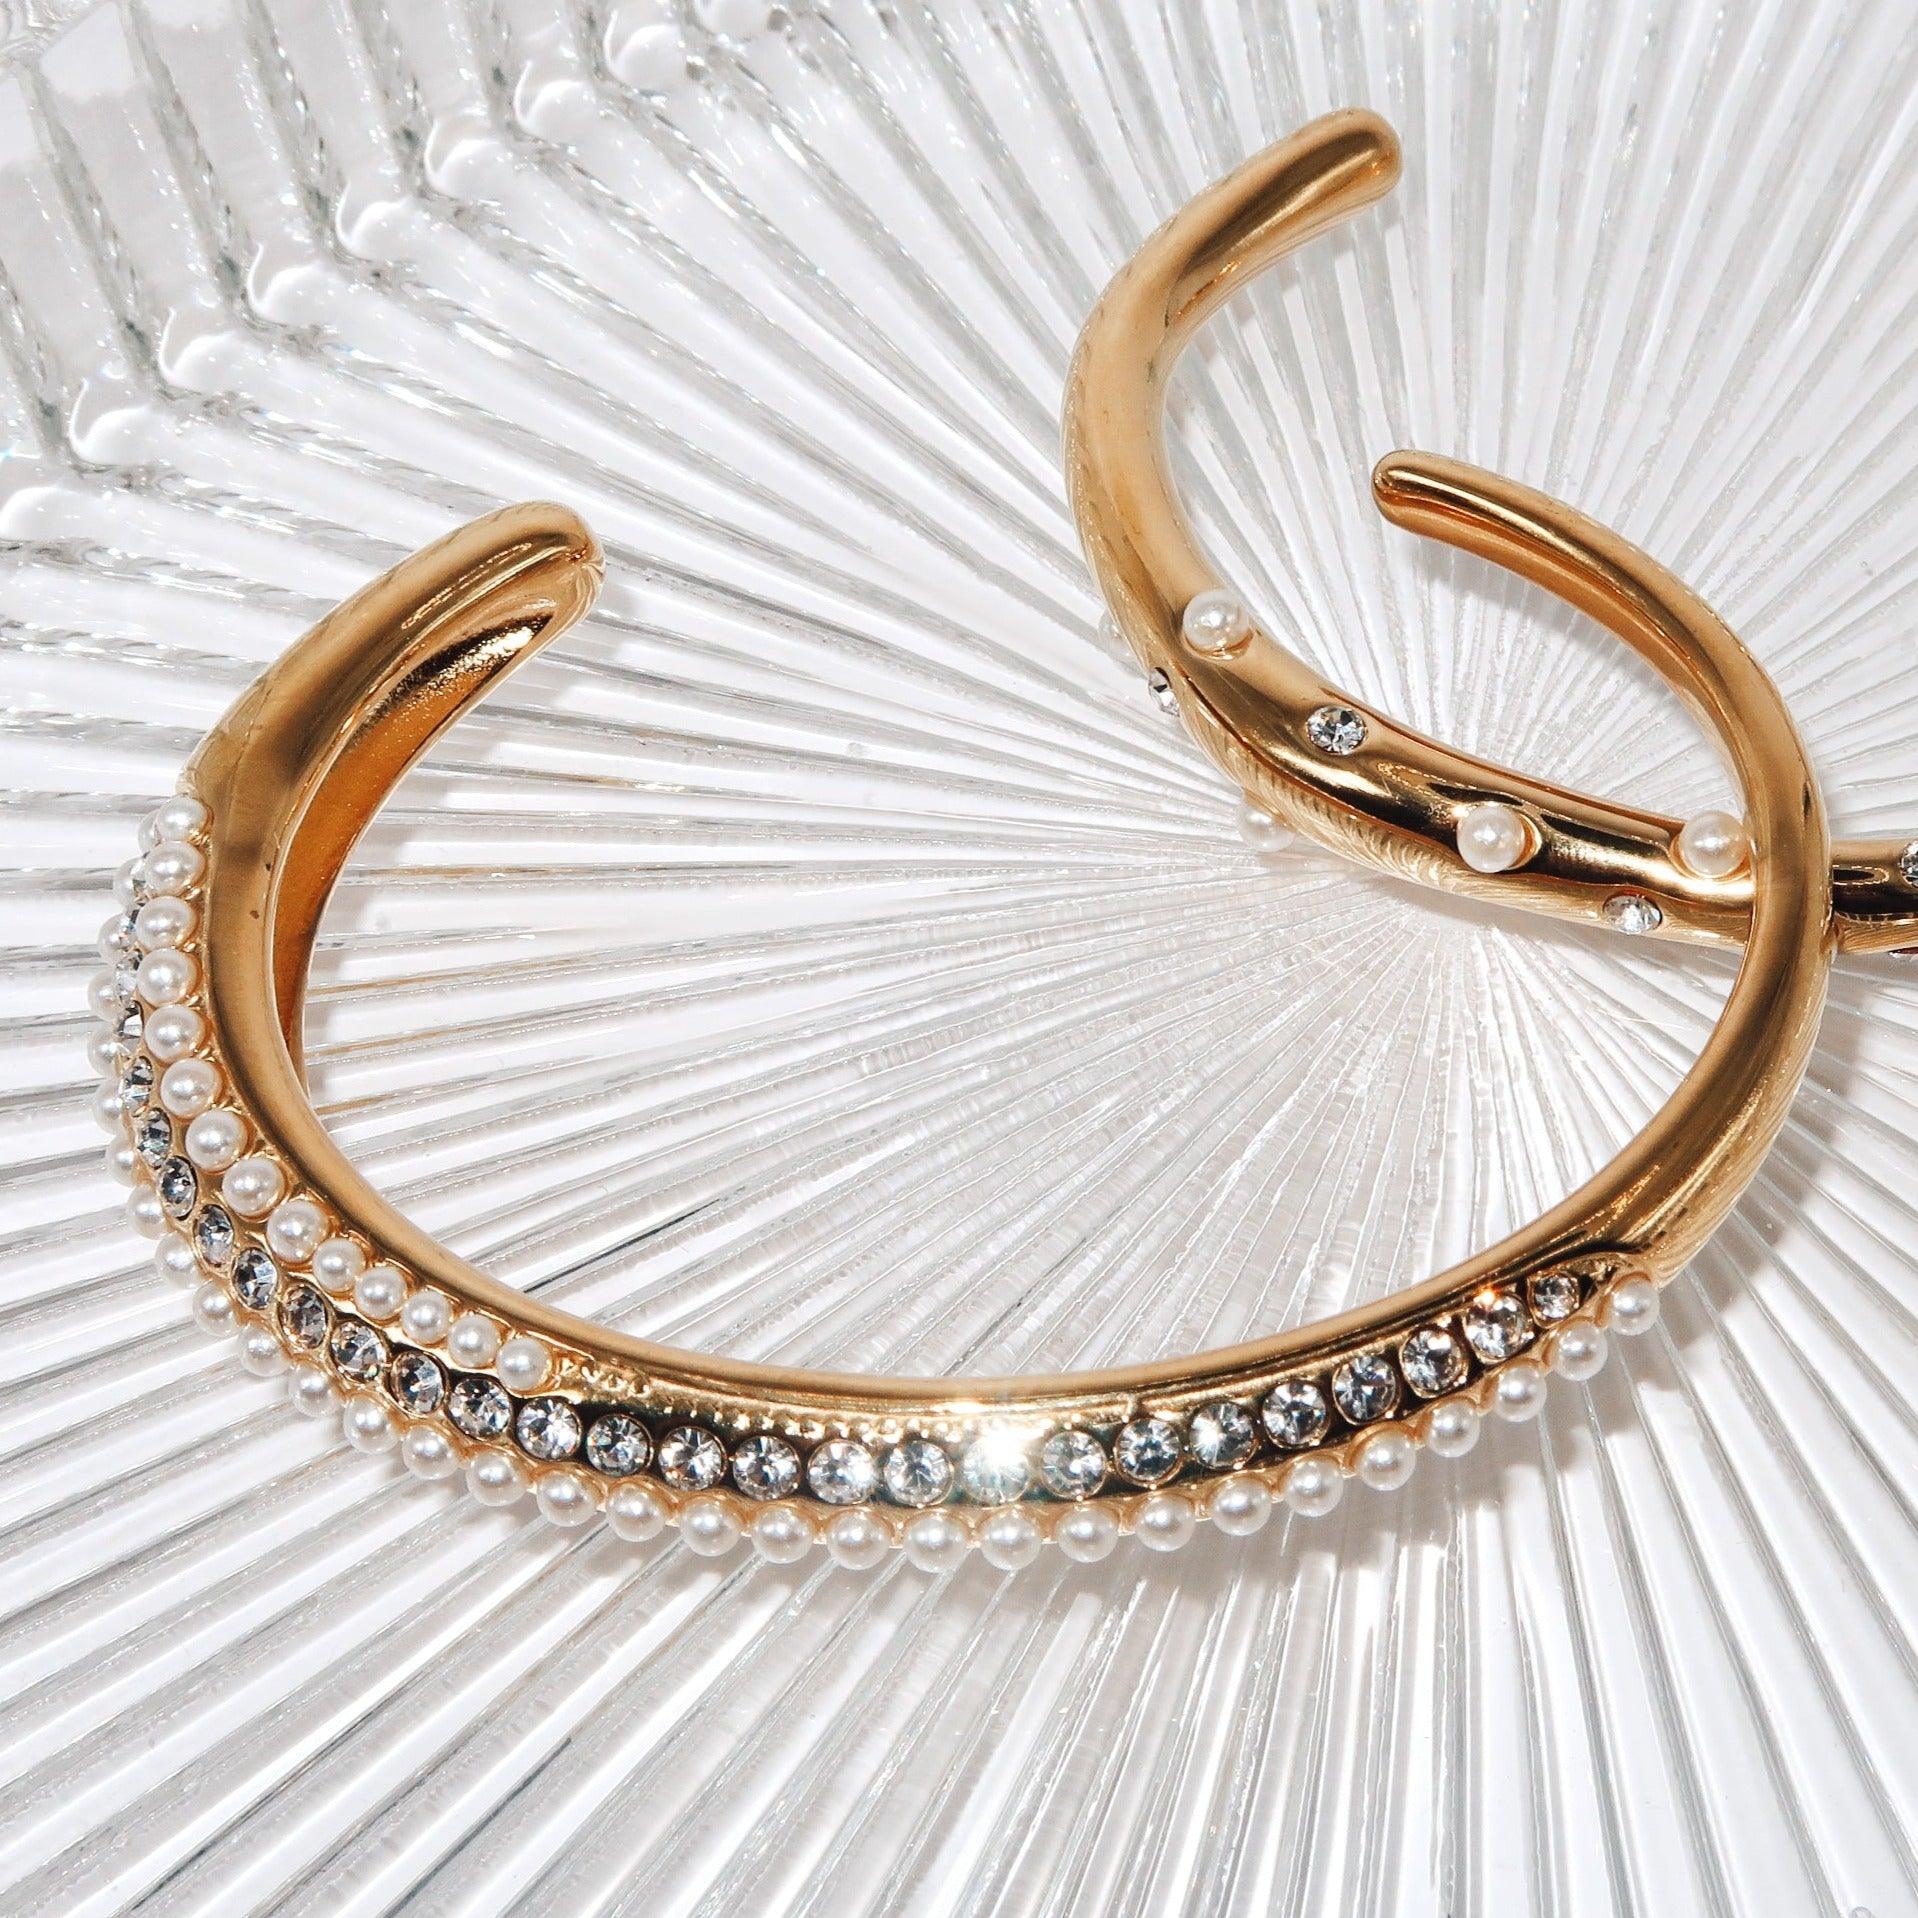 SELENA - 18K PVD Gold Plated Adjustable Cuff Bracelet with CZ Stones and Freshwater Pearls - Mixed Metals